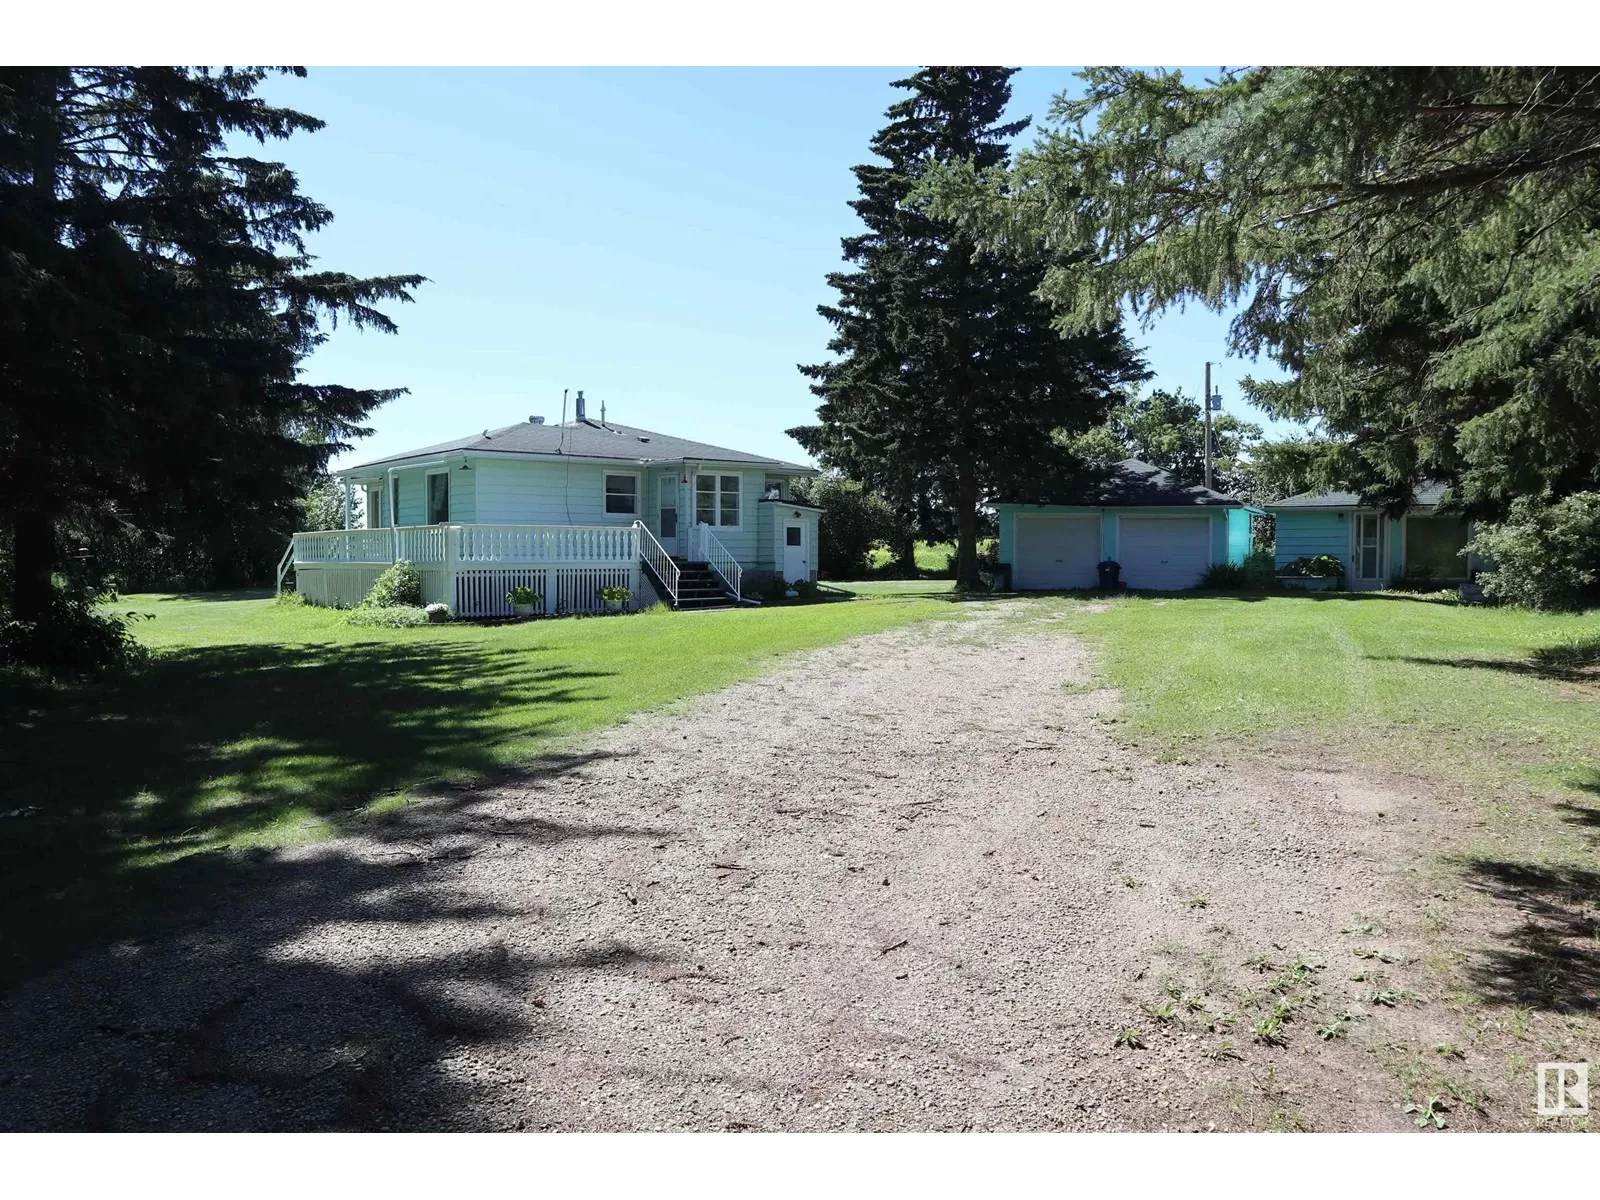 House for rent: A 50066 Rr 15, Rural Leduc County, Alberta T0C 2P0